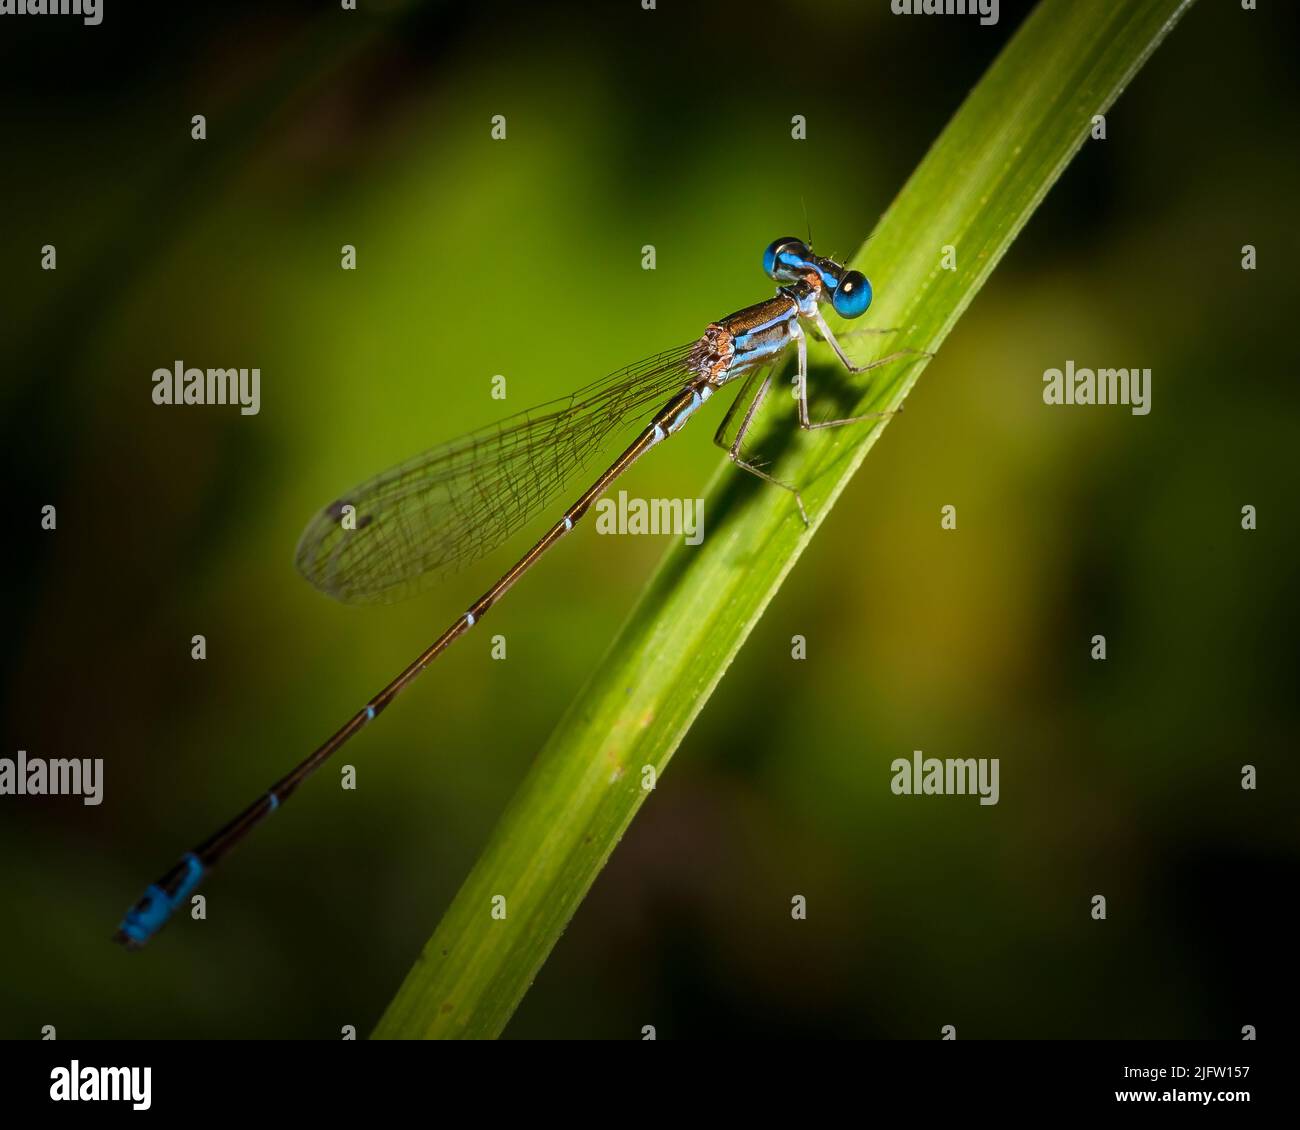 A beautiful blue damselfly perches on a plant in a botanical garden in Fort Lauderdale, FL. Stock Photo